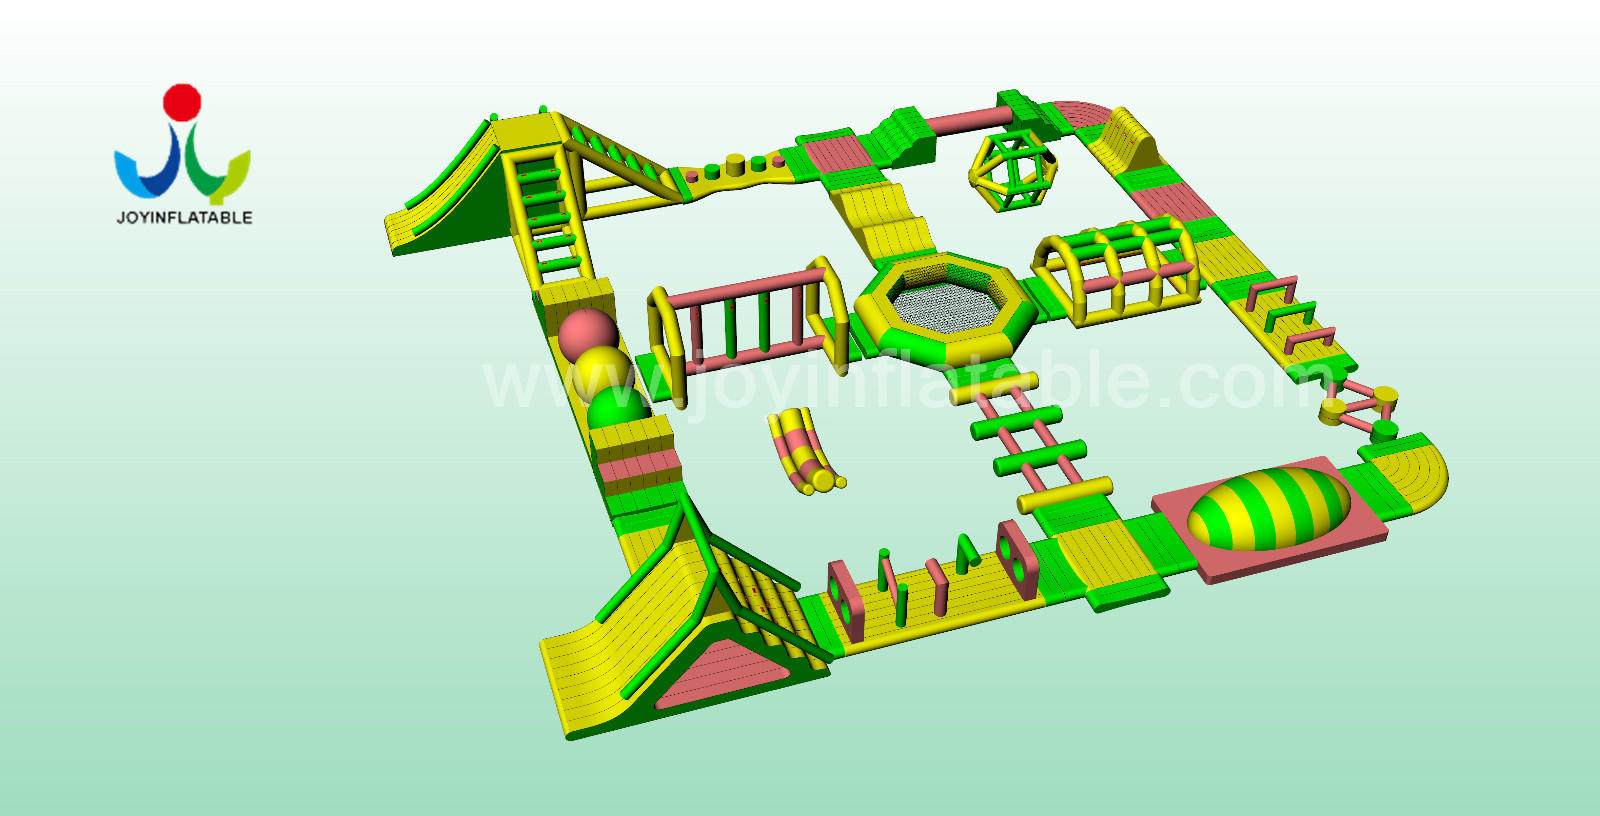 JOY inflatable blow up trampoline factory price for kids